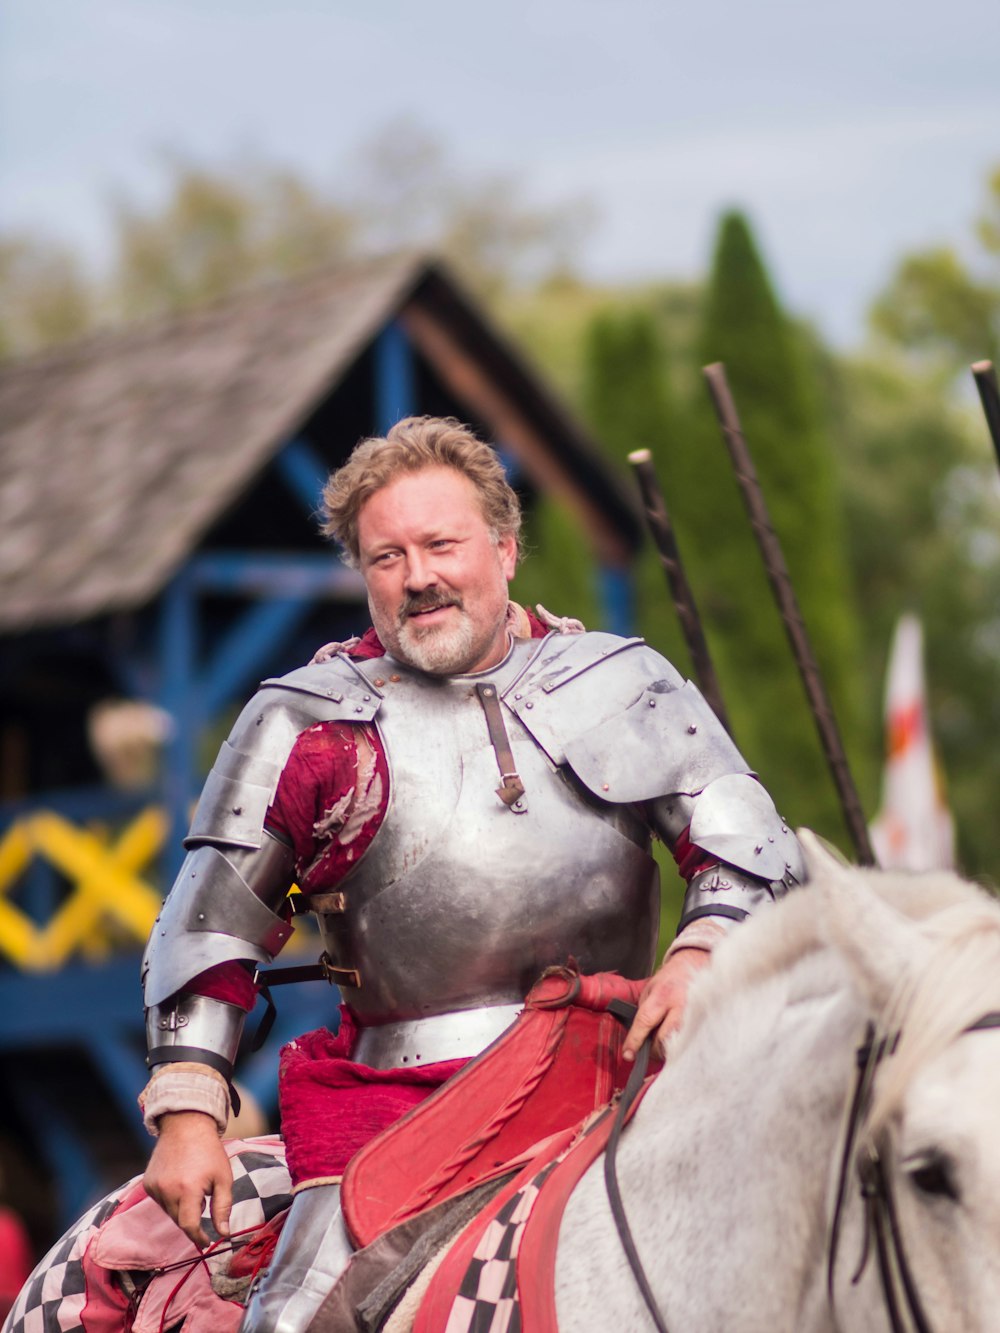 a man in a suit of armor riding a horse